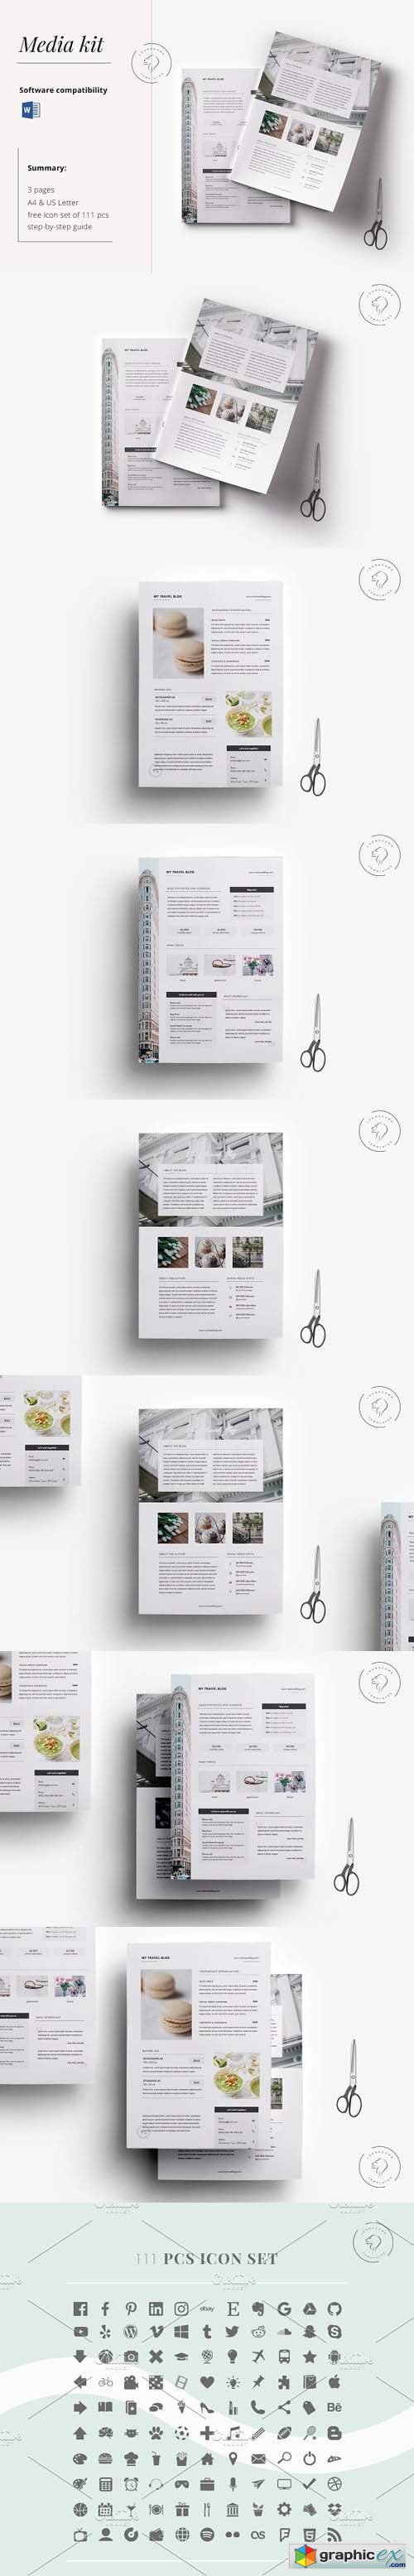 Press Kit Template for Bloggers